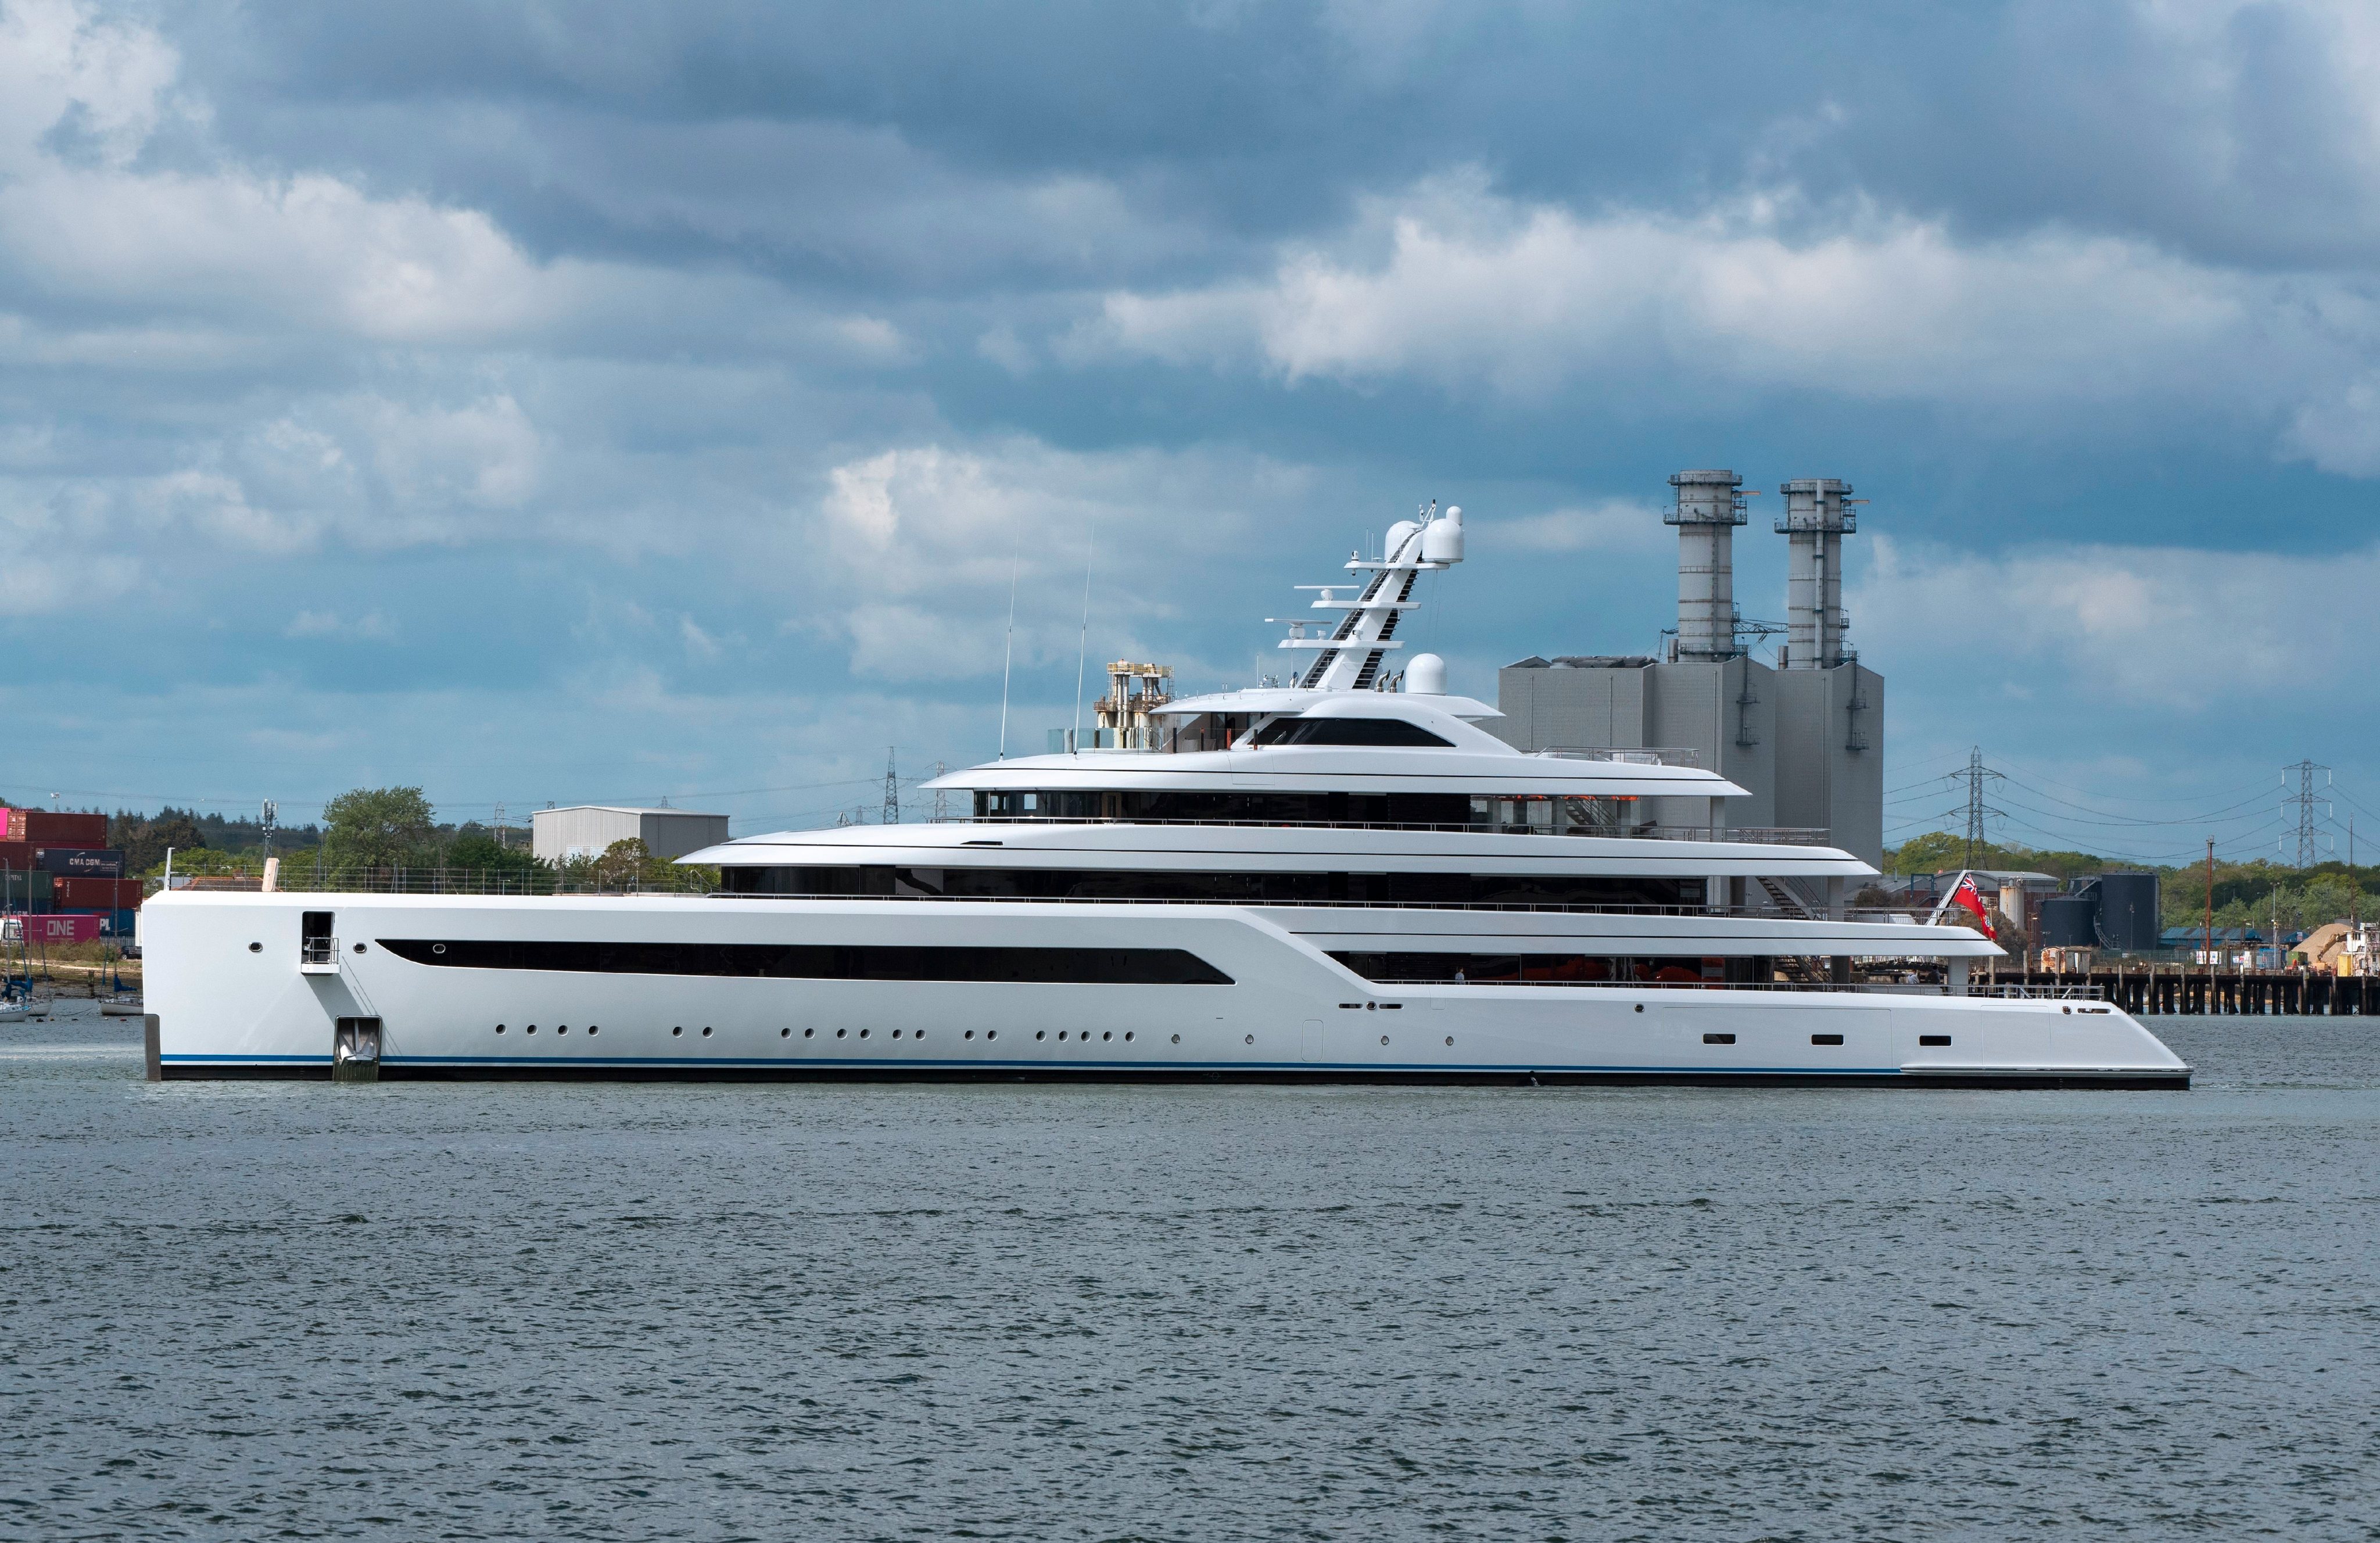 Southampton, England, UK, Super yacht Dilbar 15,917 tones, owned by Russian billionaire Alisher Usmanov departing the Port of Southampton.